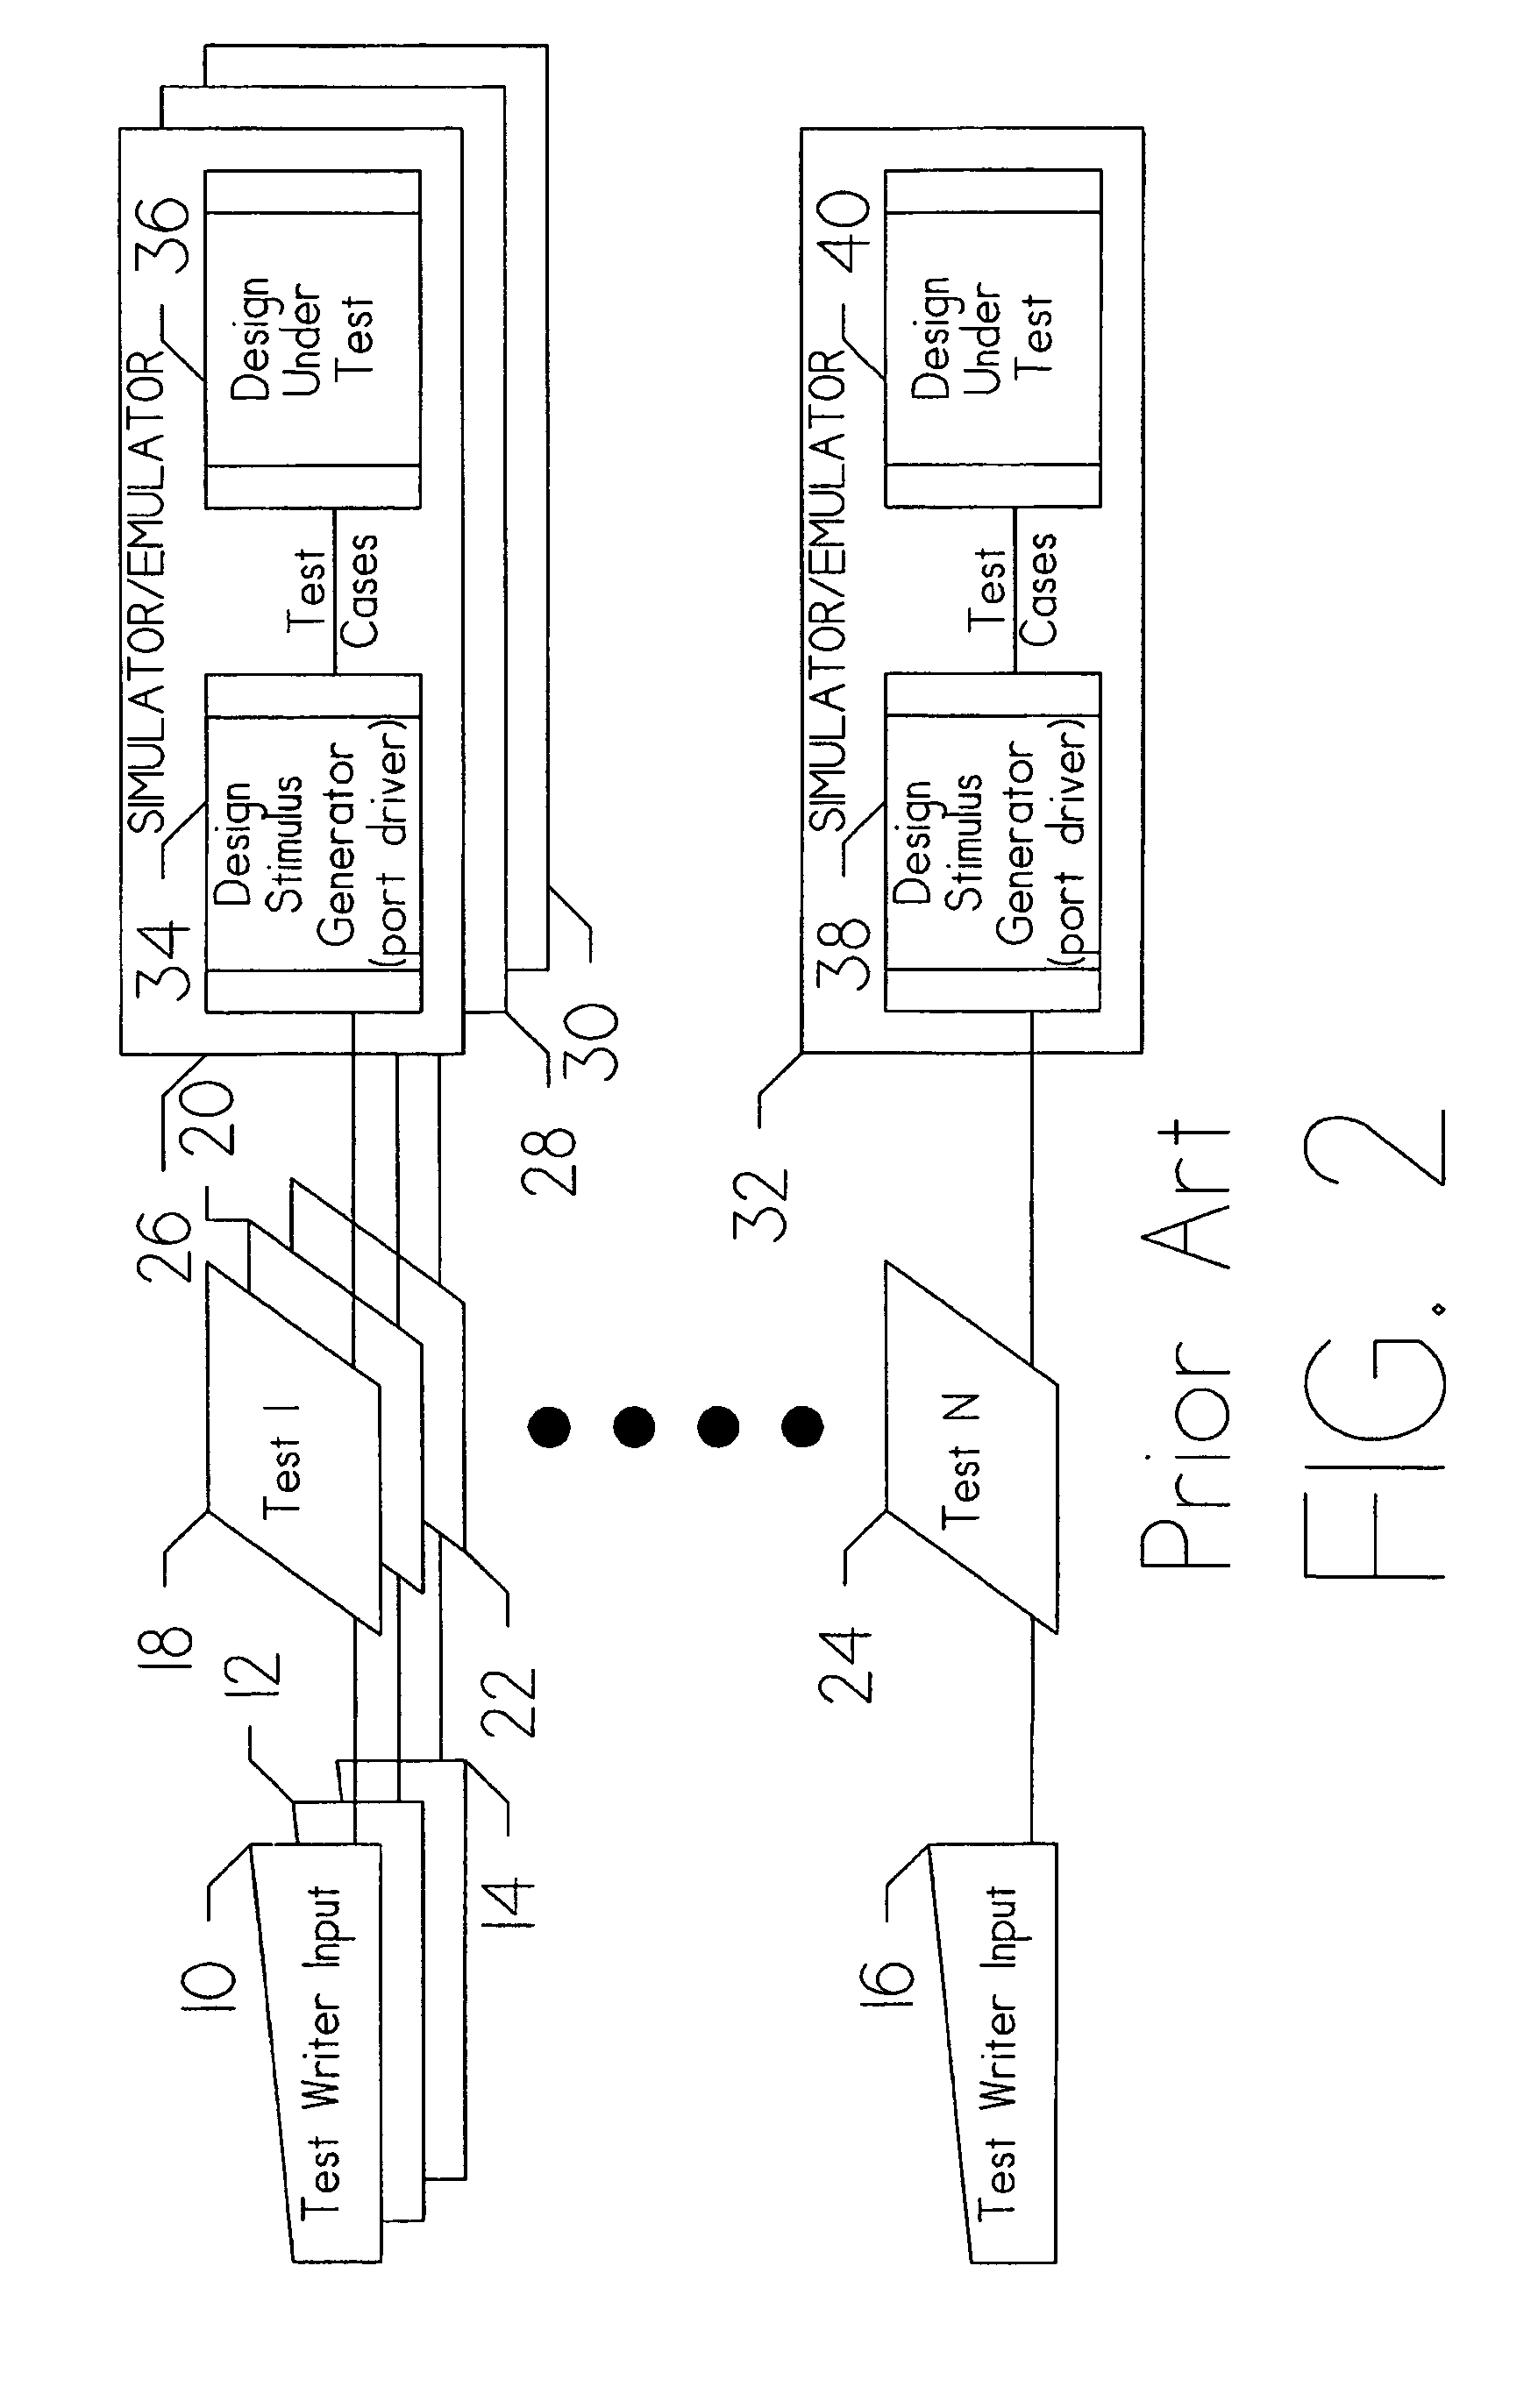 Method and apparatus for choosing tests for simulation and associated algorithms and hierarchical bipartite graph data structure